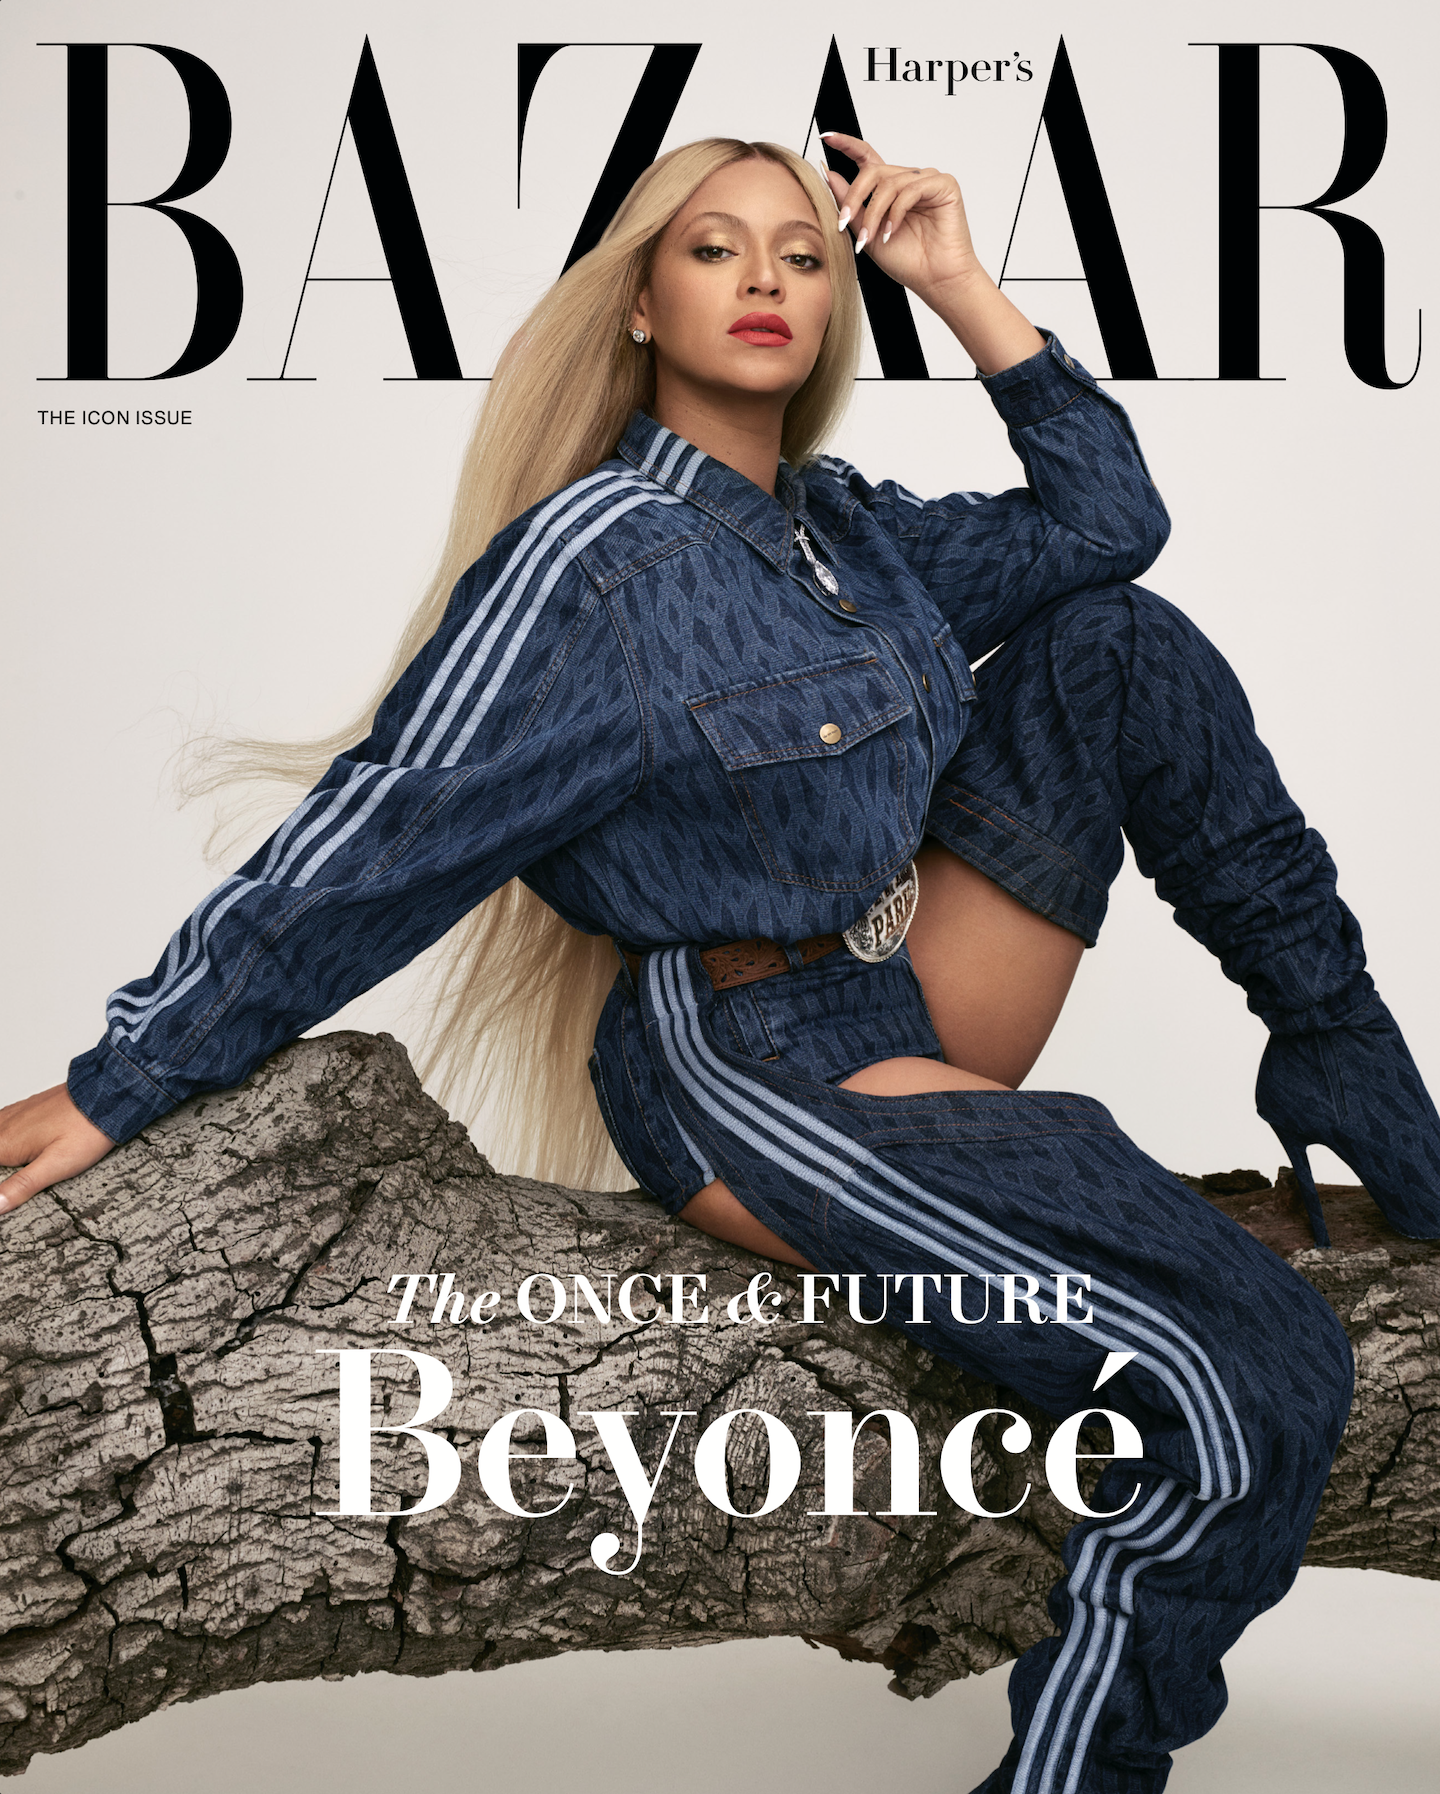 Beyonce-by-Campbell-Addy-Harpers-Bazaar-US-September-2021 (1).png